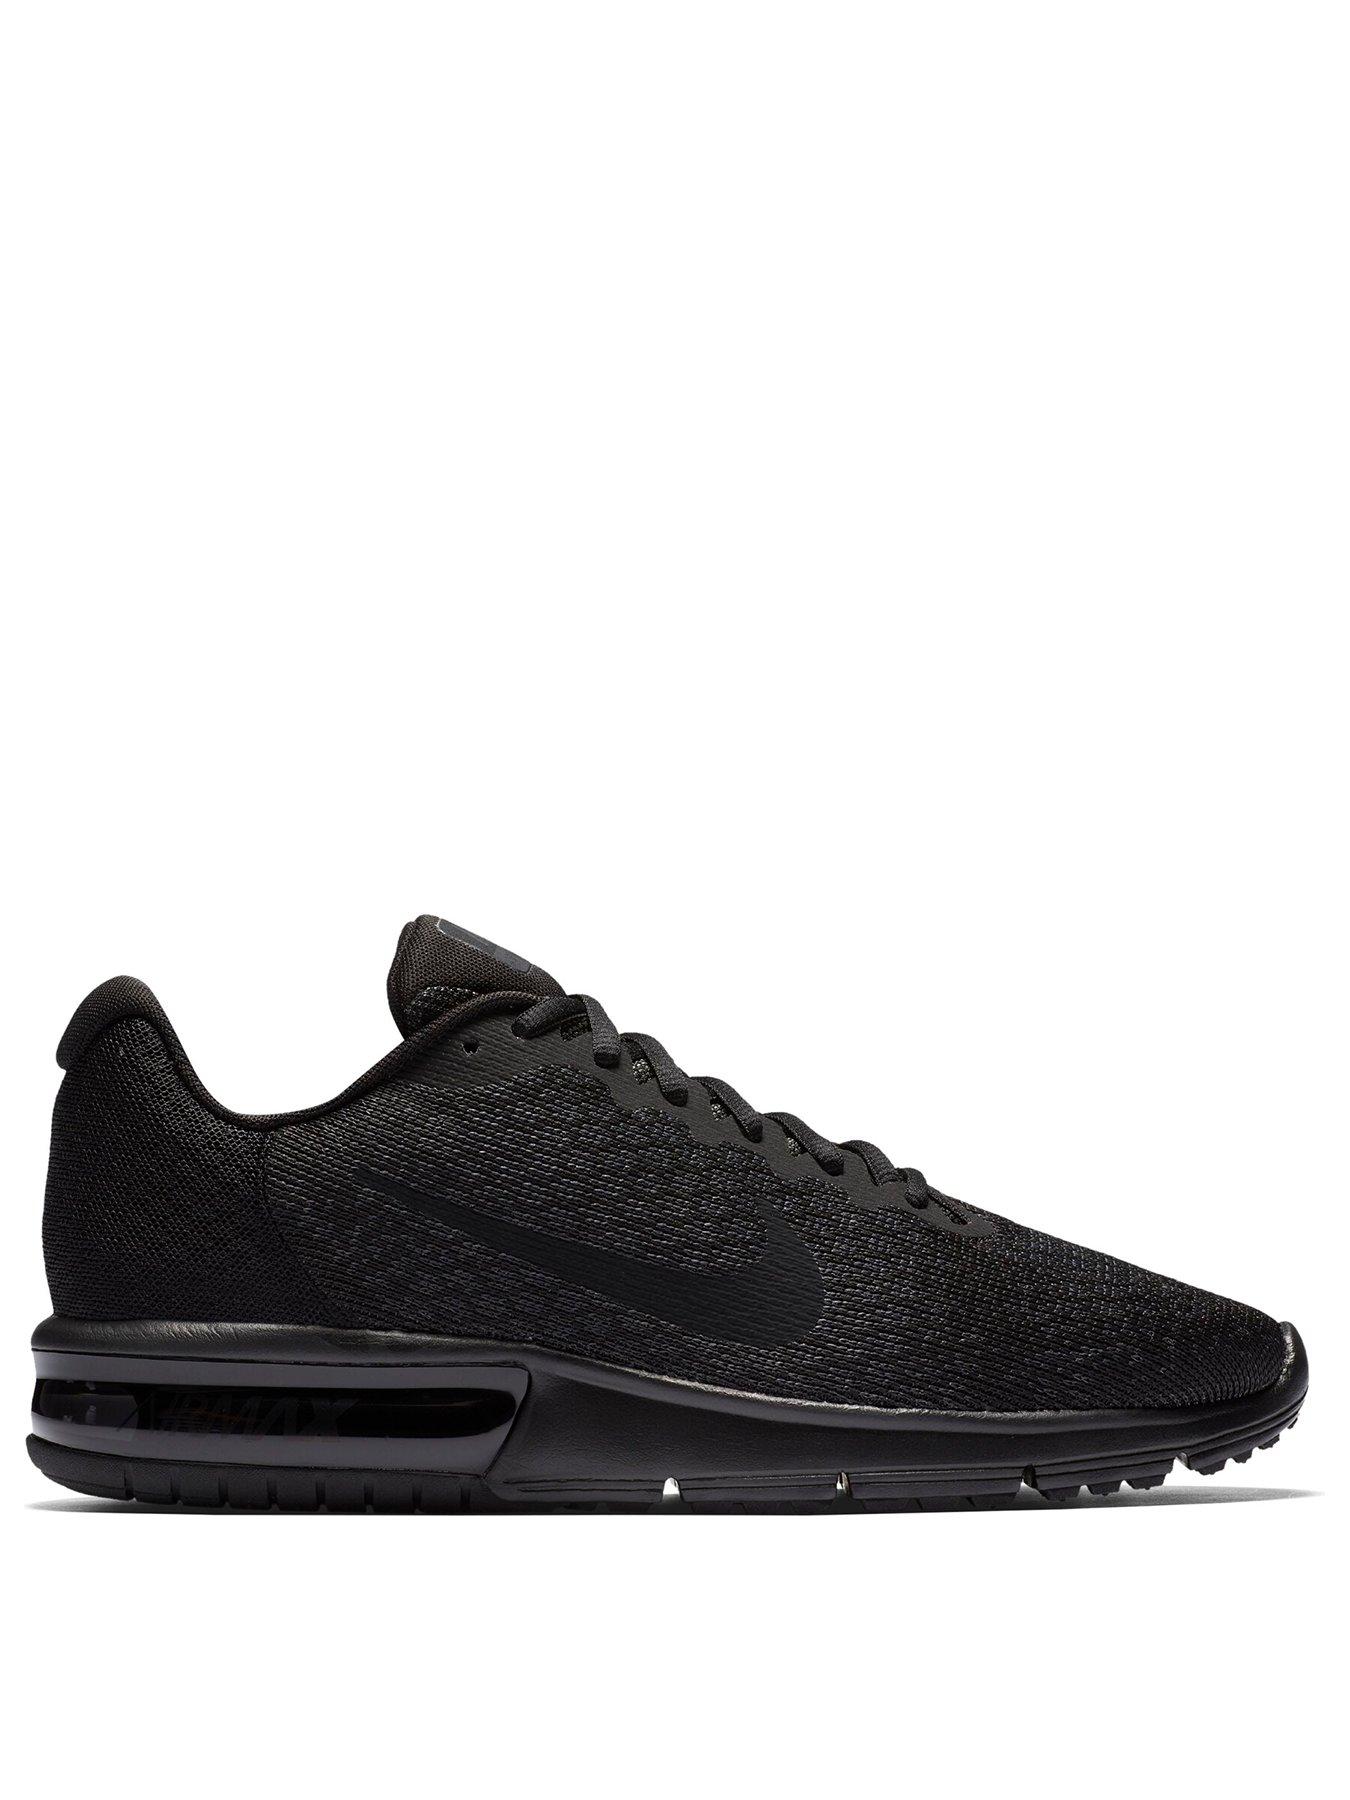 nike sequent 2 black